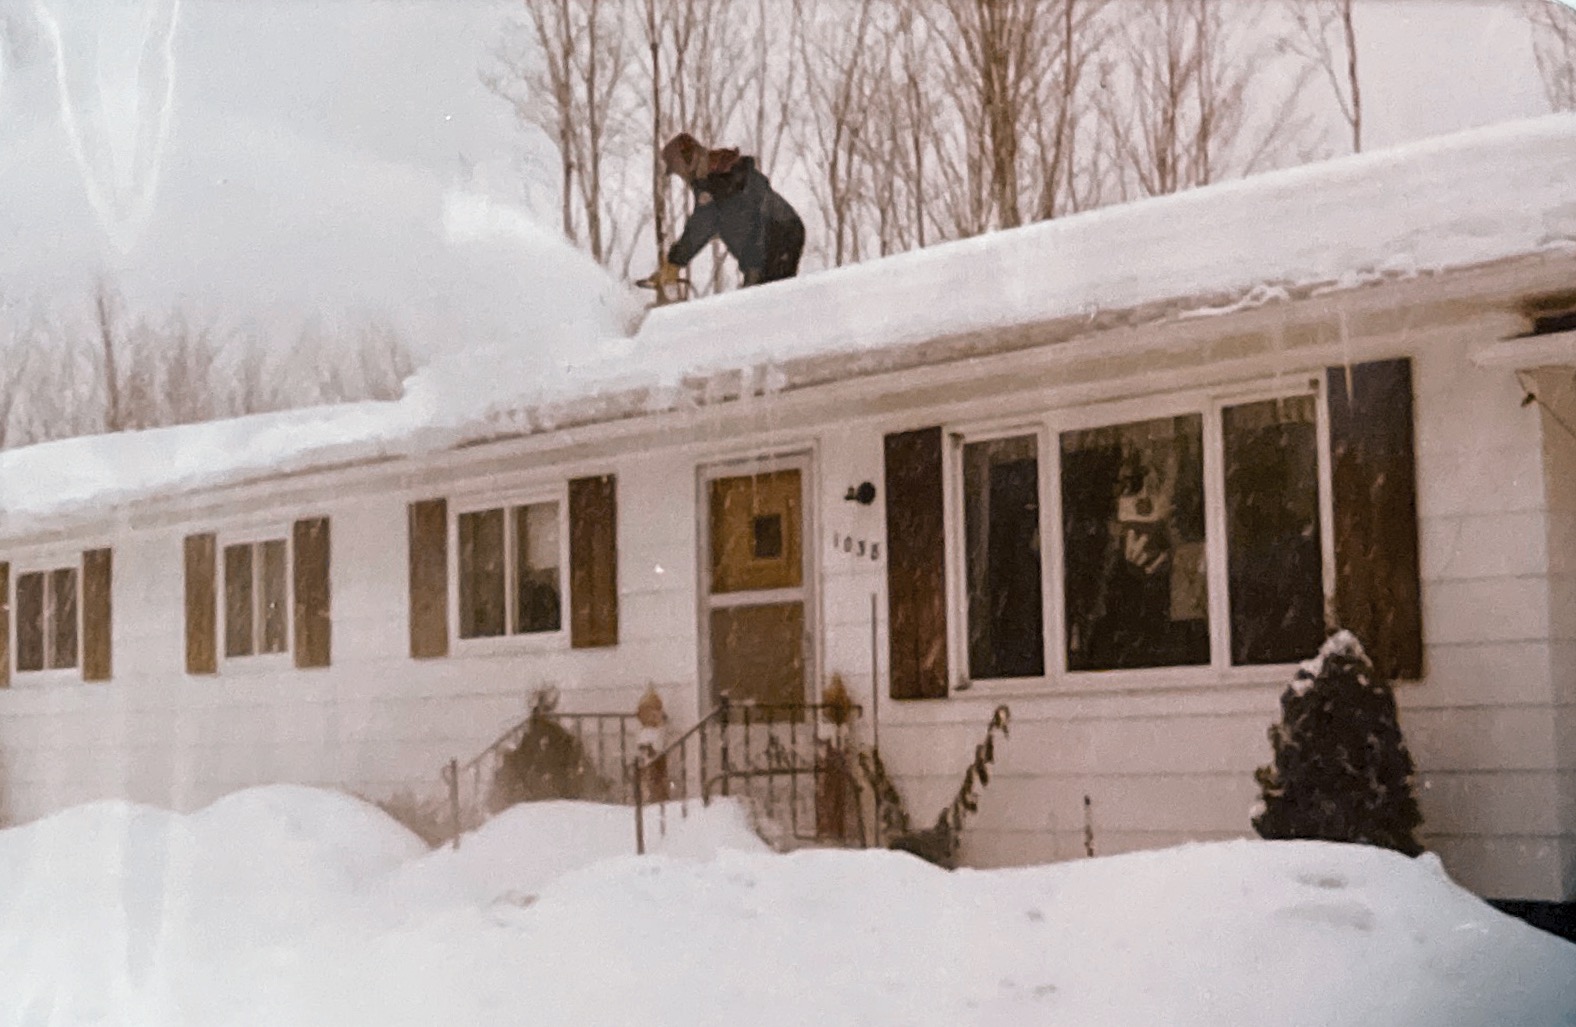 Snow in the upper Peninsula of Michigan… This is White Pine, Michigan. This photo was taken somtime in the 1980’s